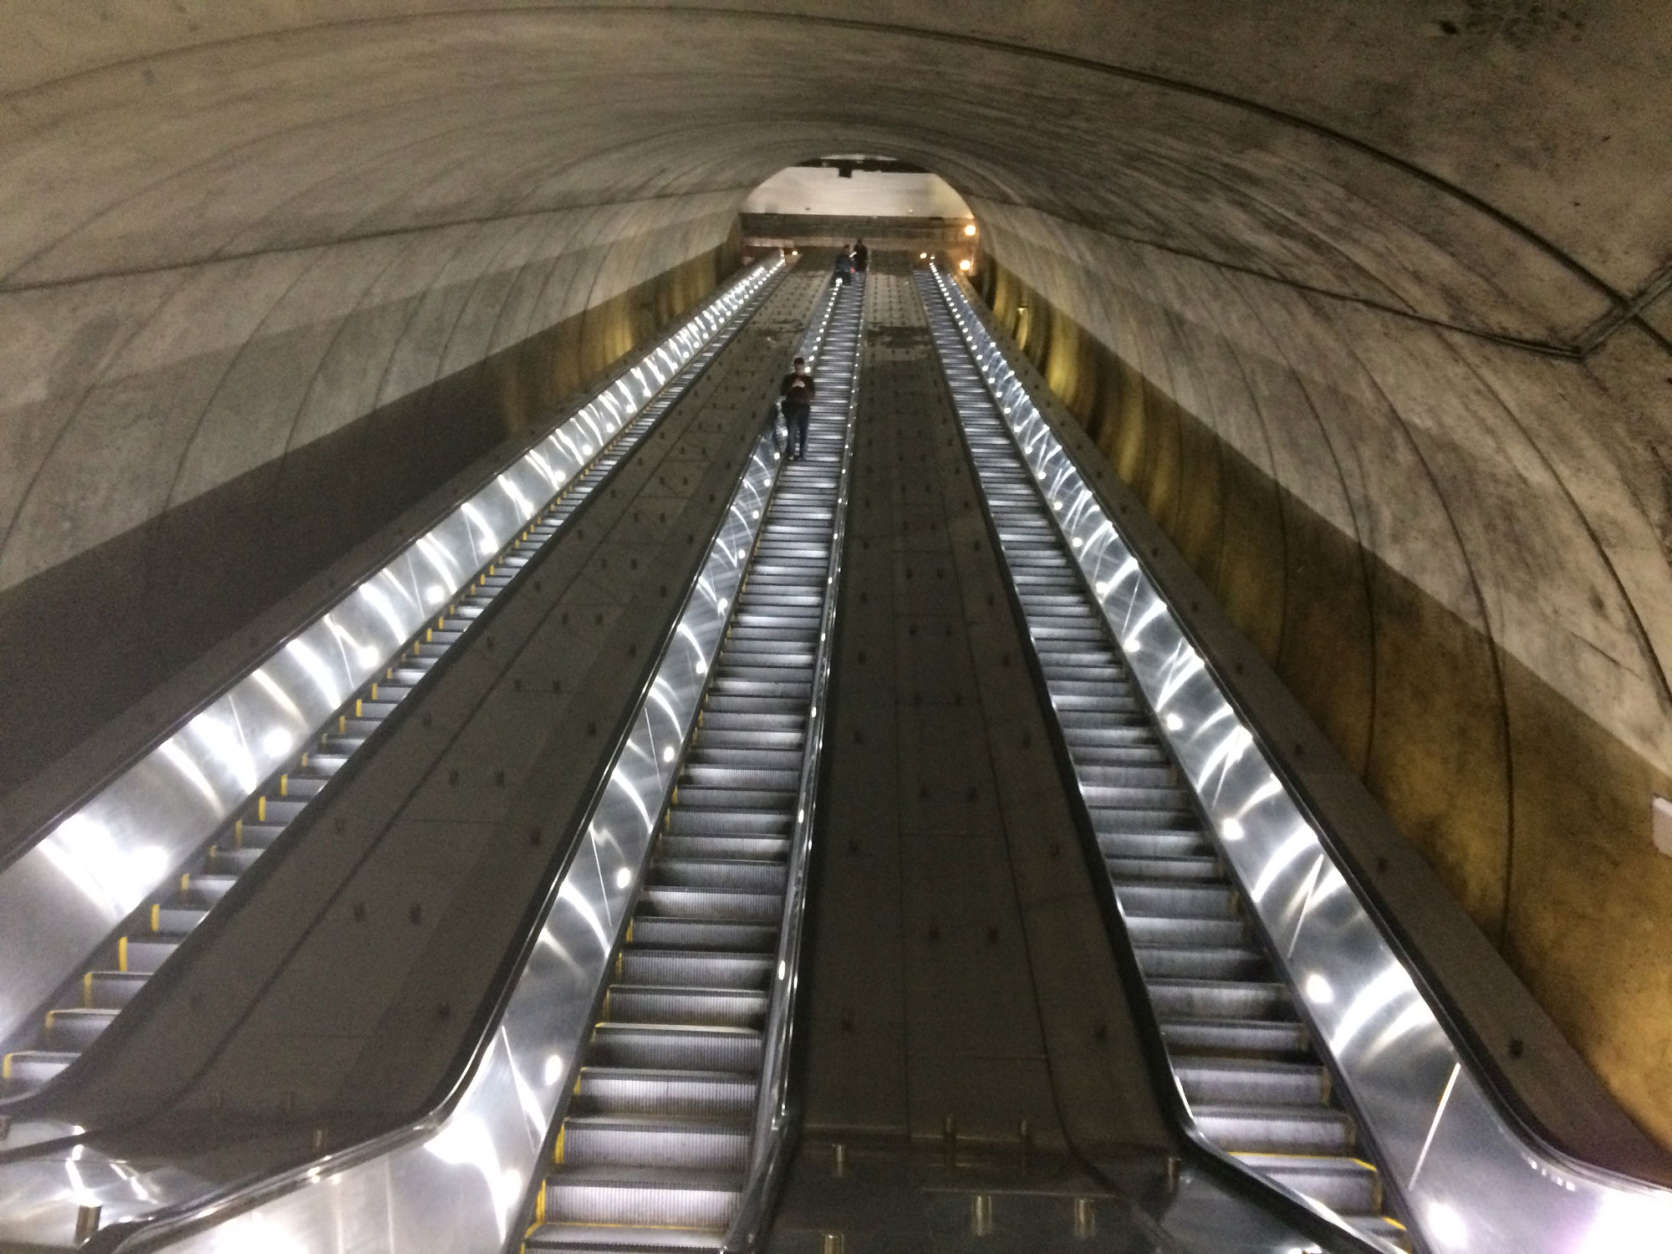 The view from the bottom of the new escalator at Bethesda. (WTOP/Dick Uliano)